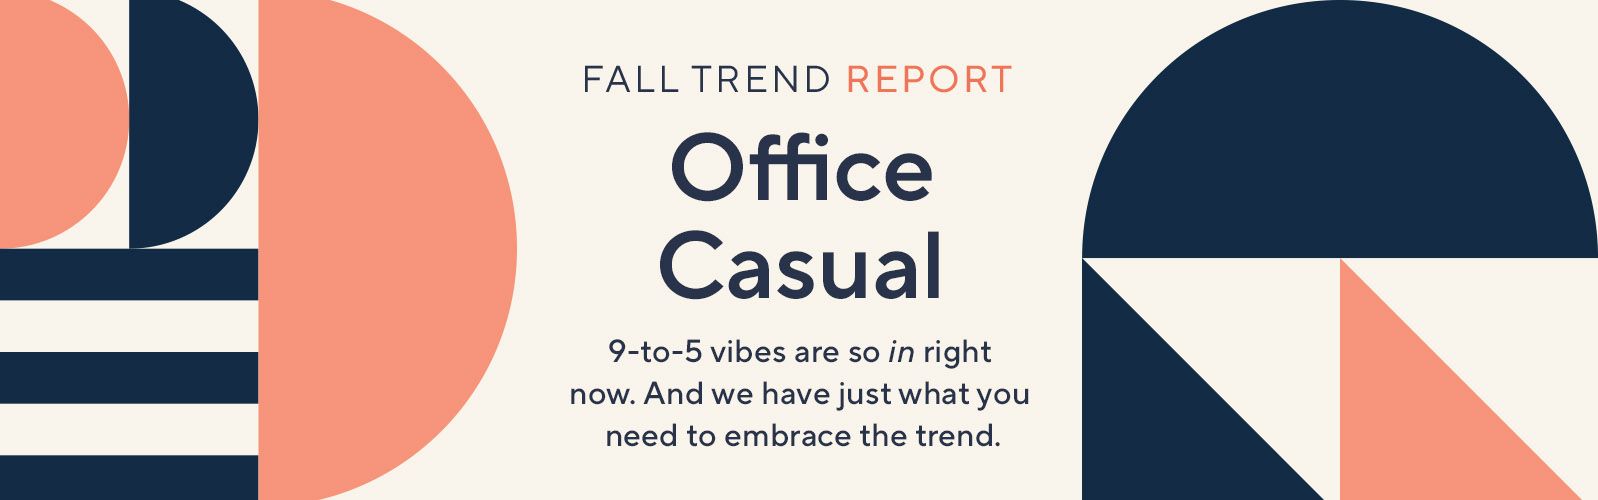 Fall Trend Report. Office Casual. 9-to-5 vibes are so in right now. And we have just what you need to embrace the trend.